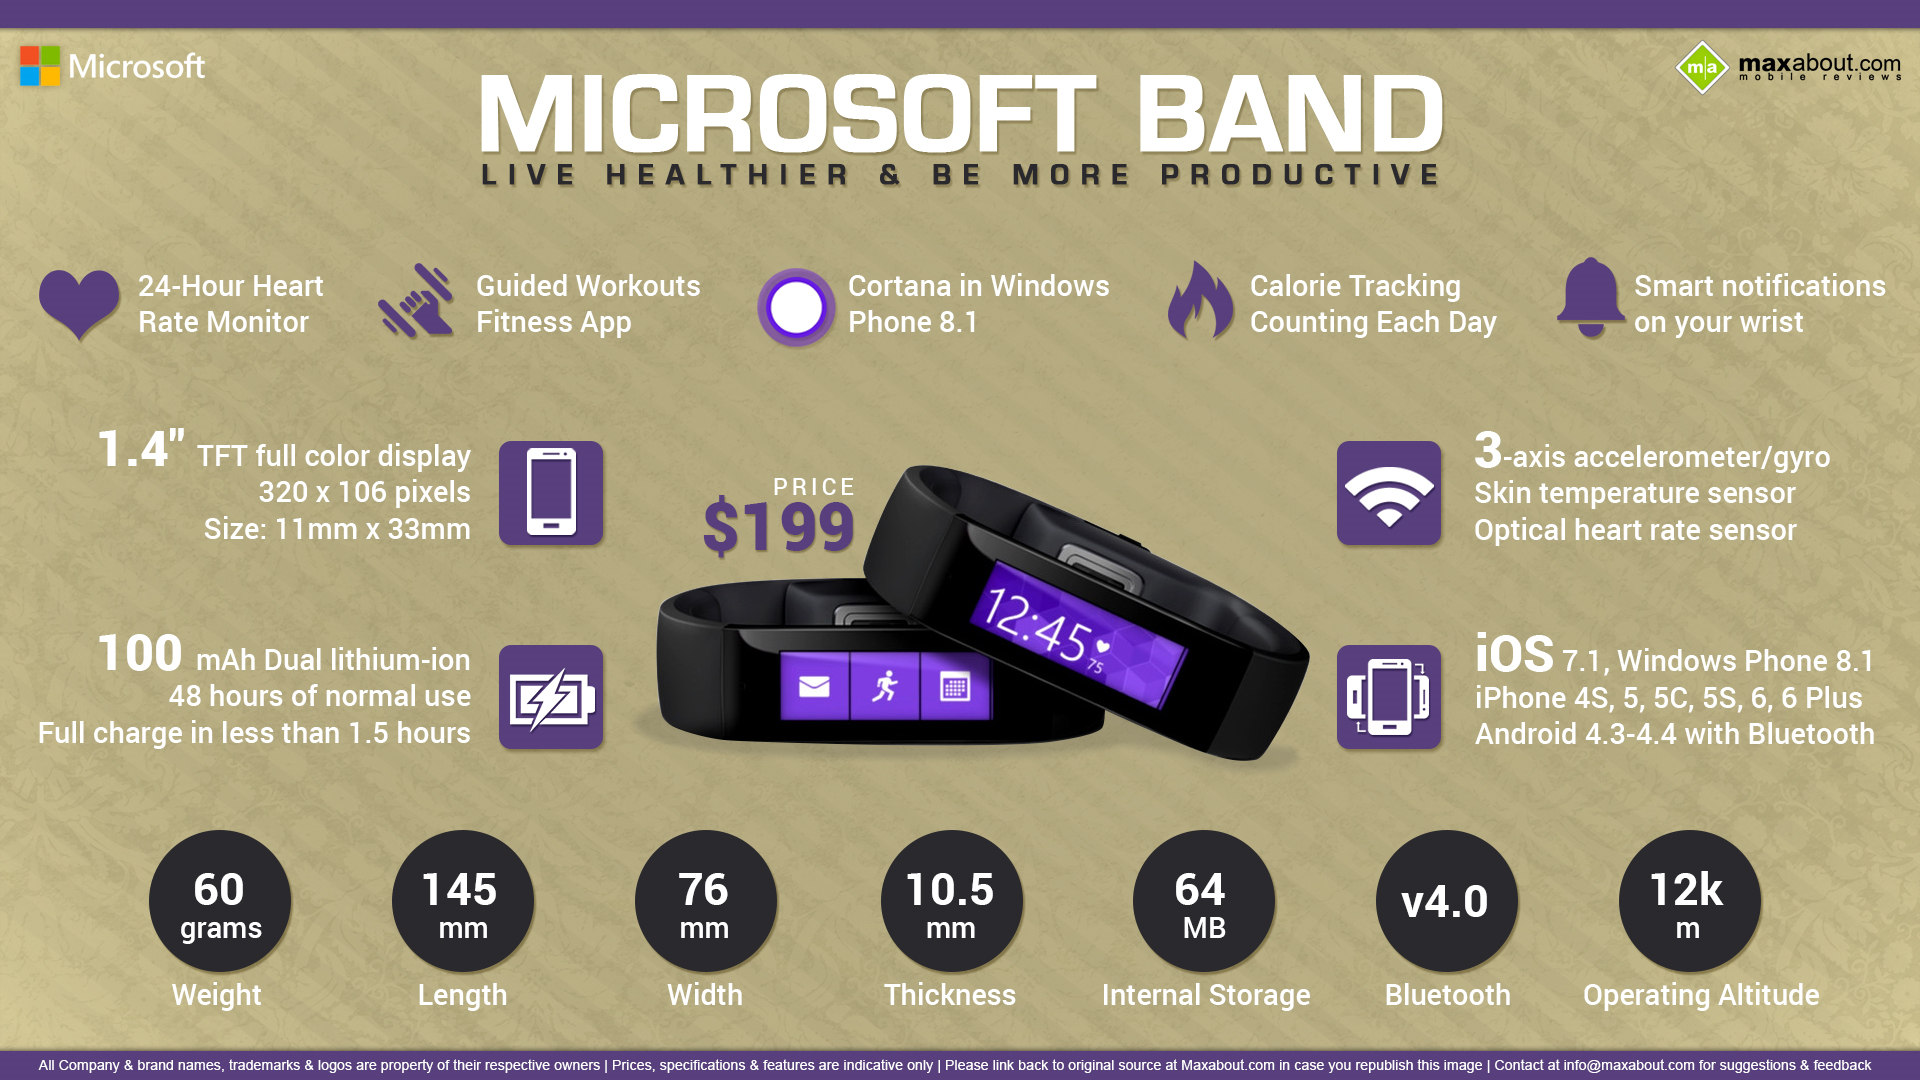 Microsoft Band   Live healthier and be more productive